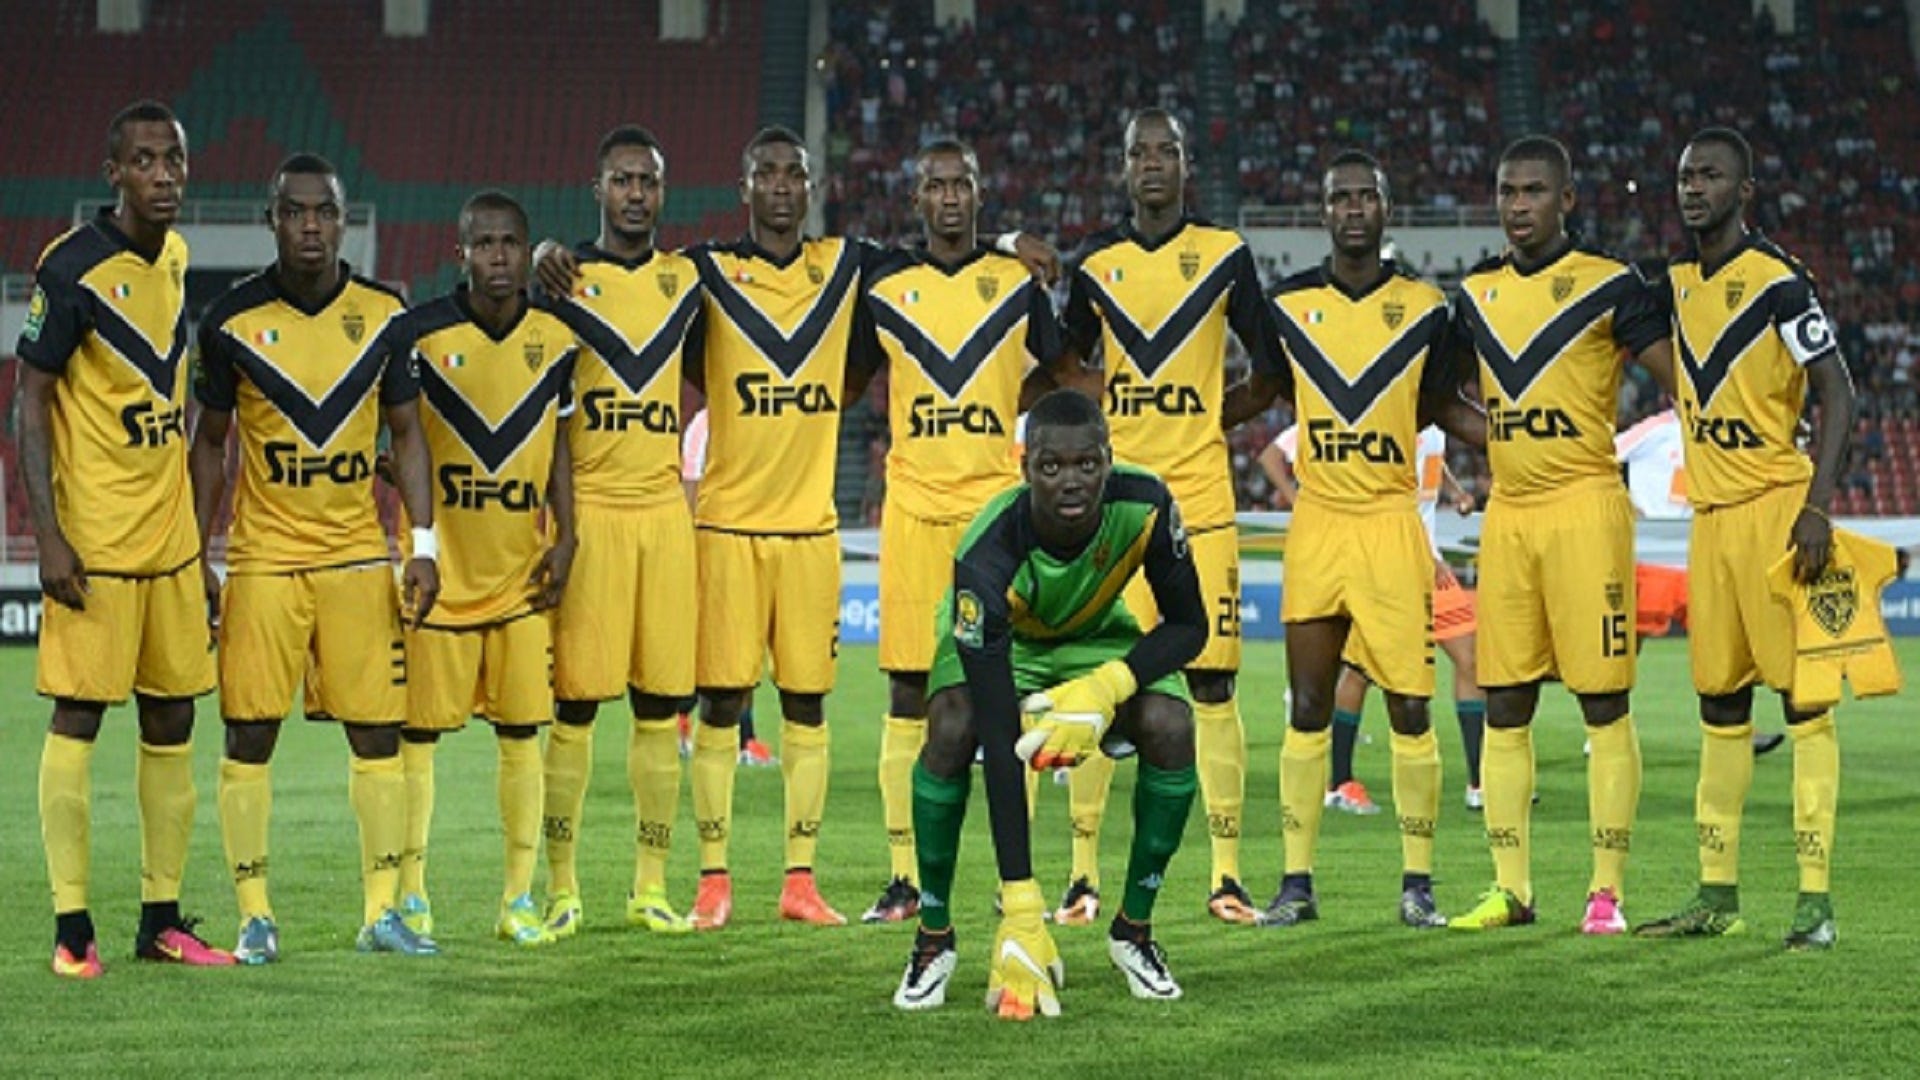 ASEC Mimosas Standings: Tracking Their Performance